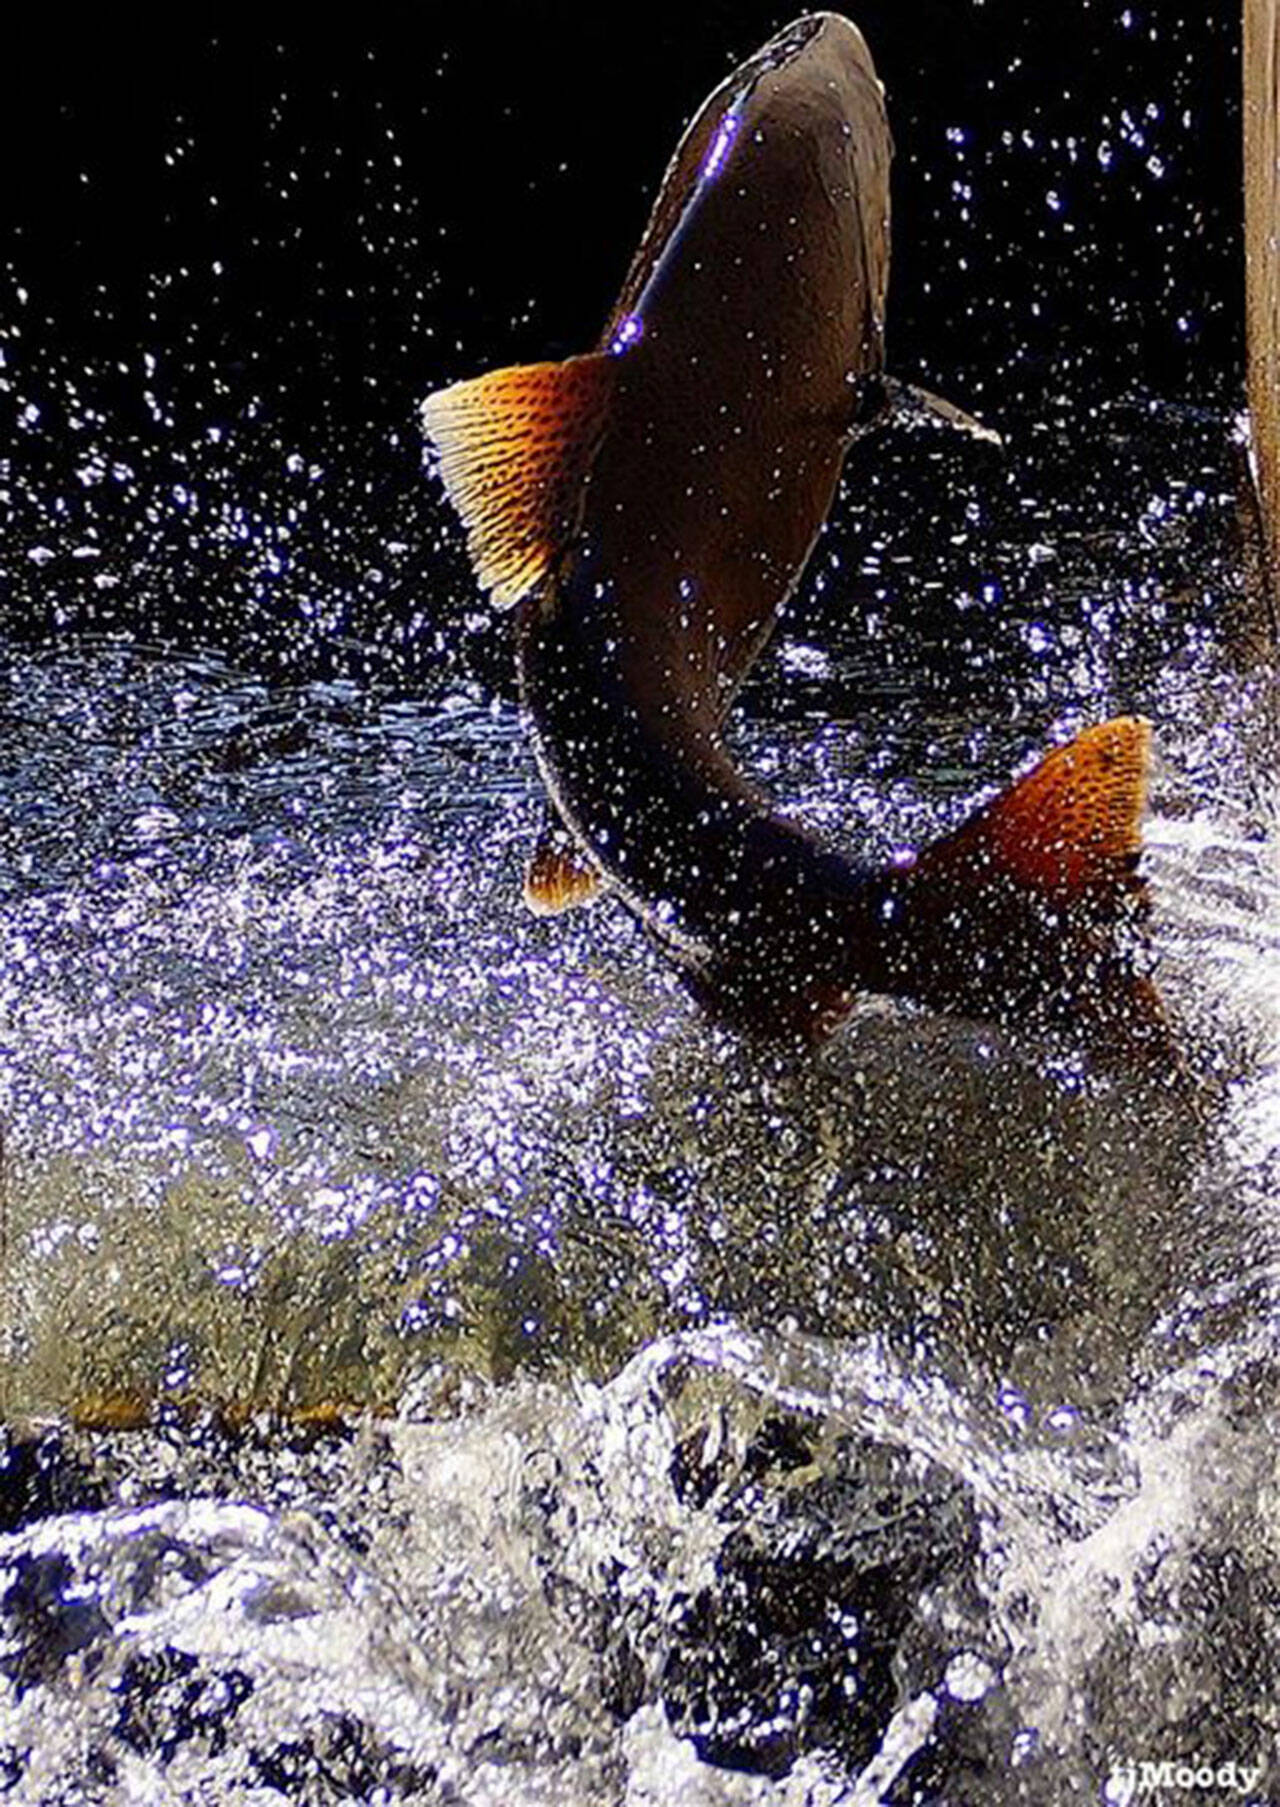 File photo courtesy of T.J. Moody
A salmon moves through the water during Salmon Days in Issaquah.